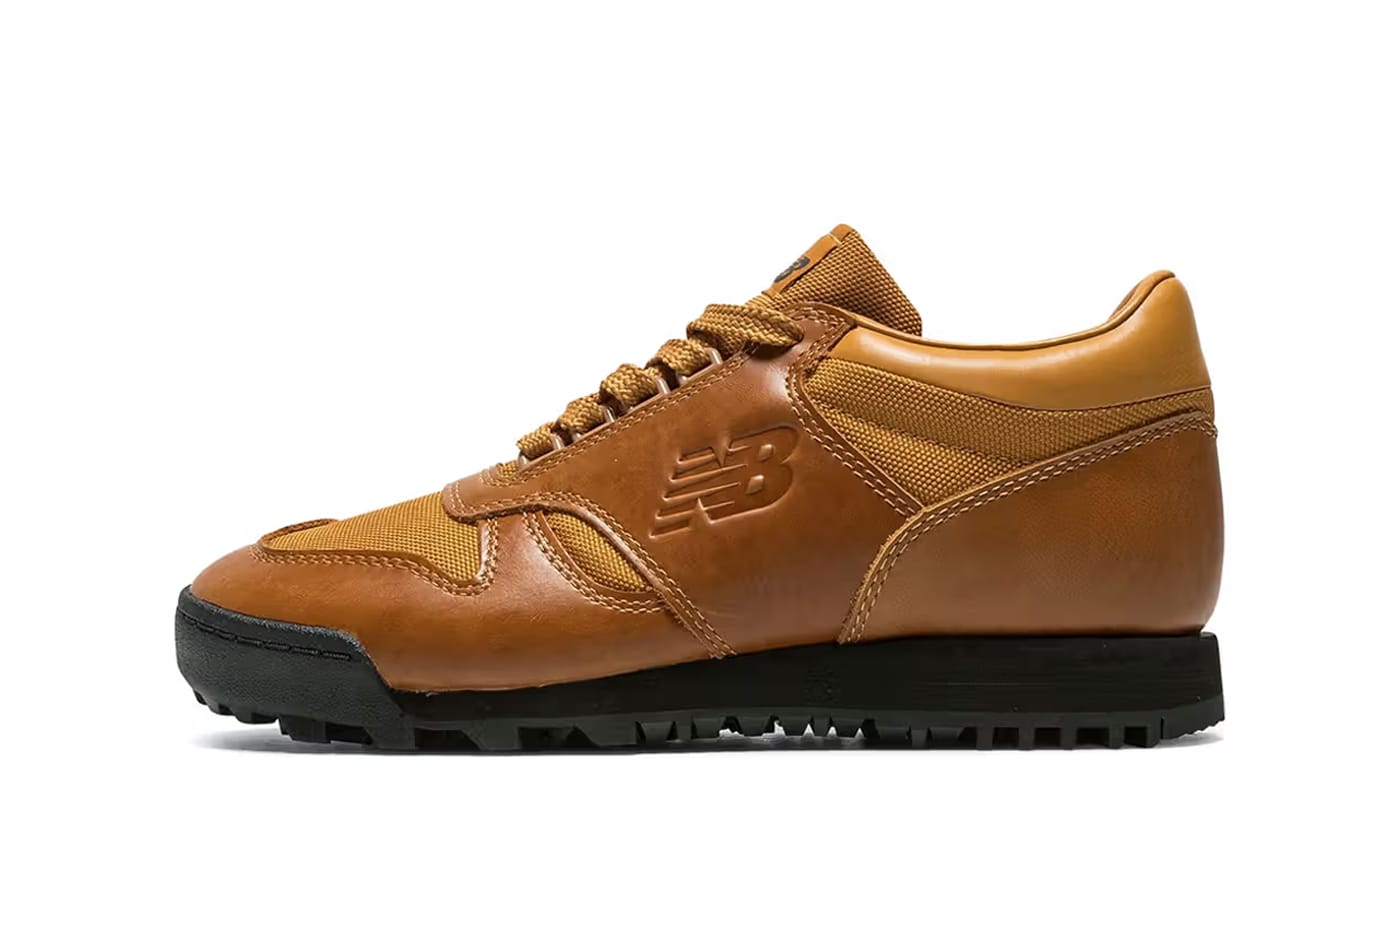 New Balance 580 low-top Leather Sneakers - Farfetch